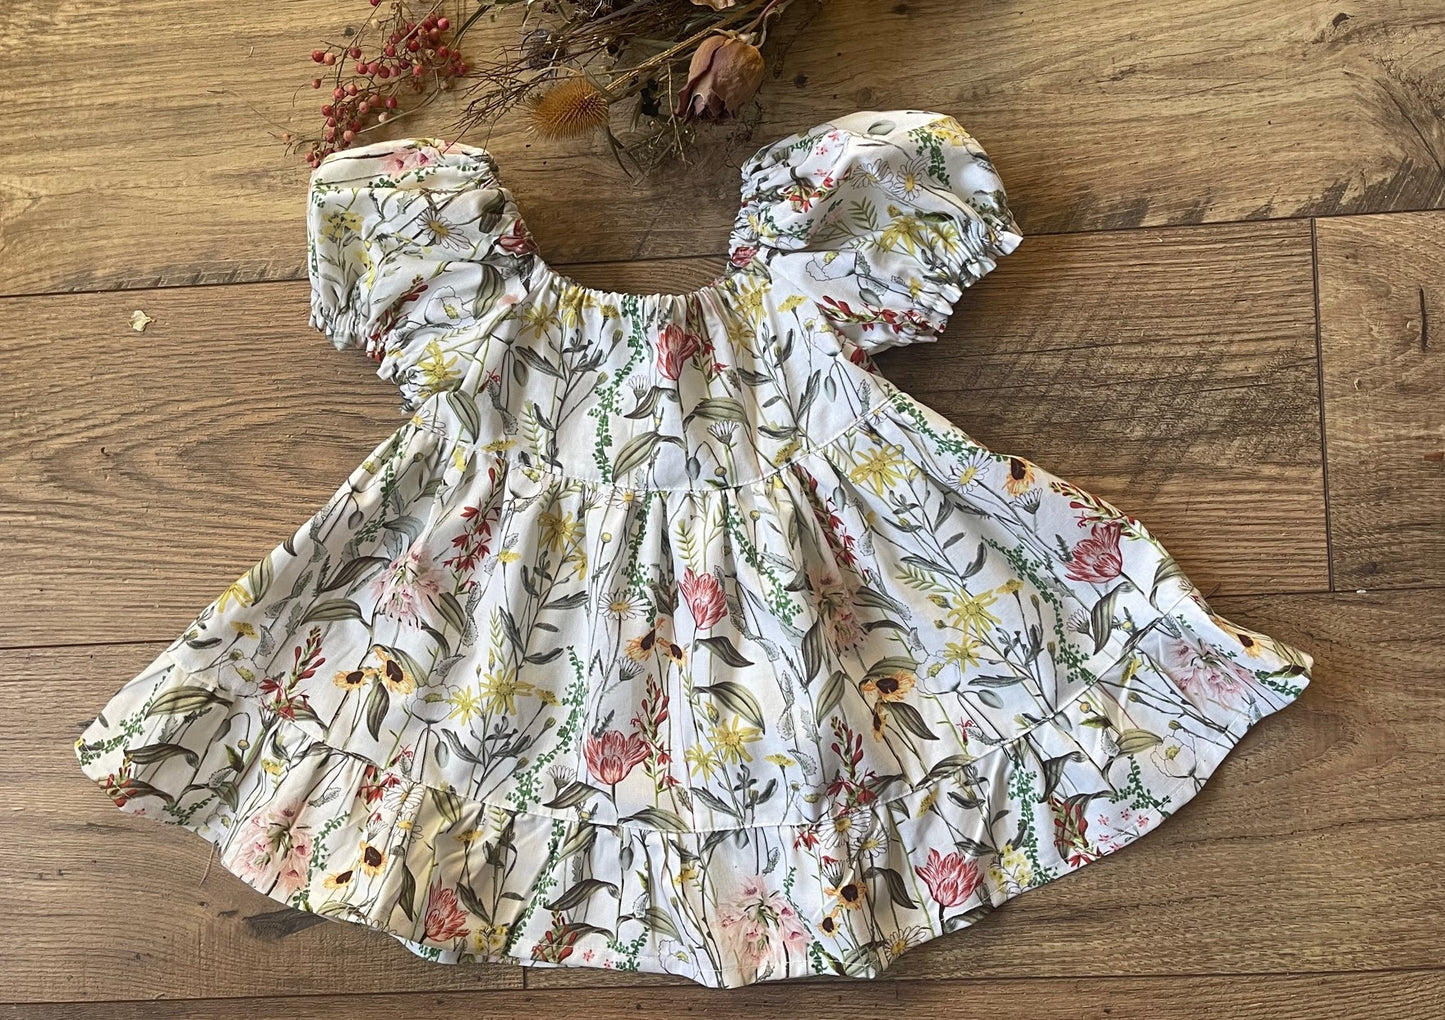 Girls Infant Toddler Peasant Boho Style Wildflowers Pastel Floral Dress with puff sleeves with 2 tier ruffle bottom hem ruffle